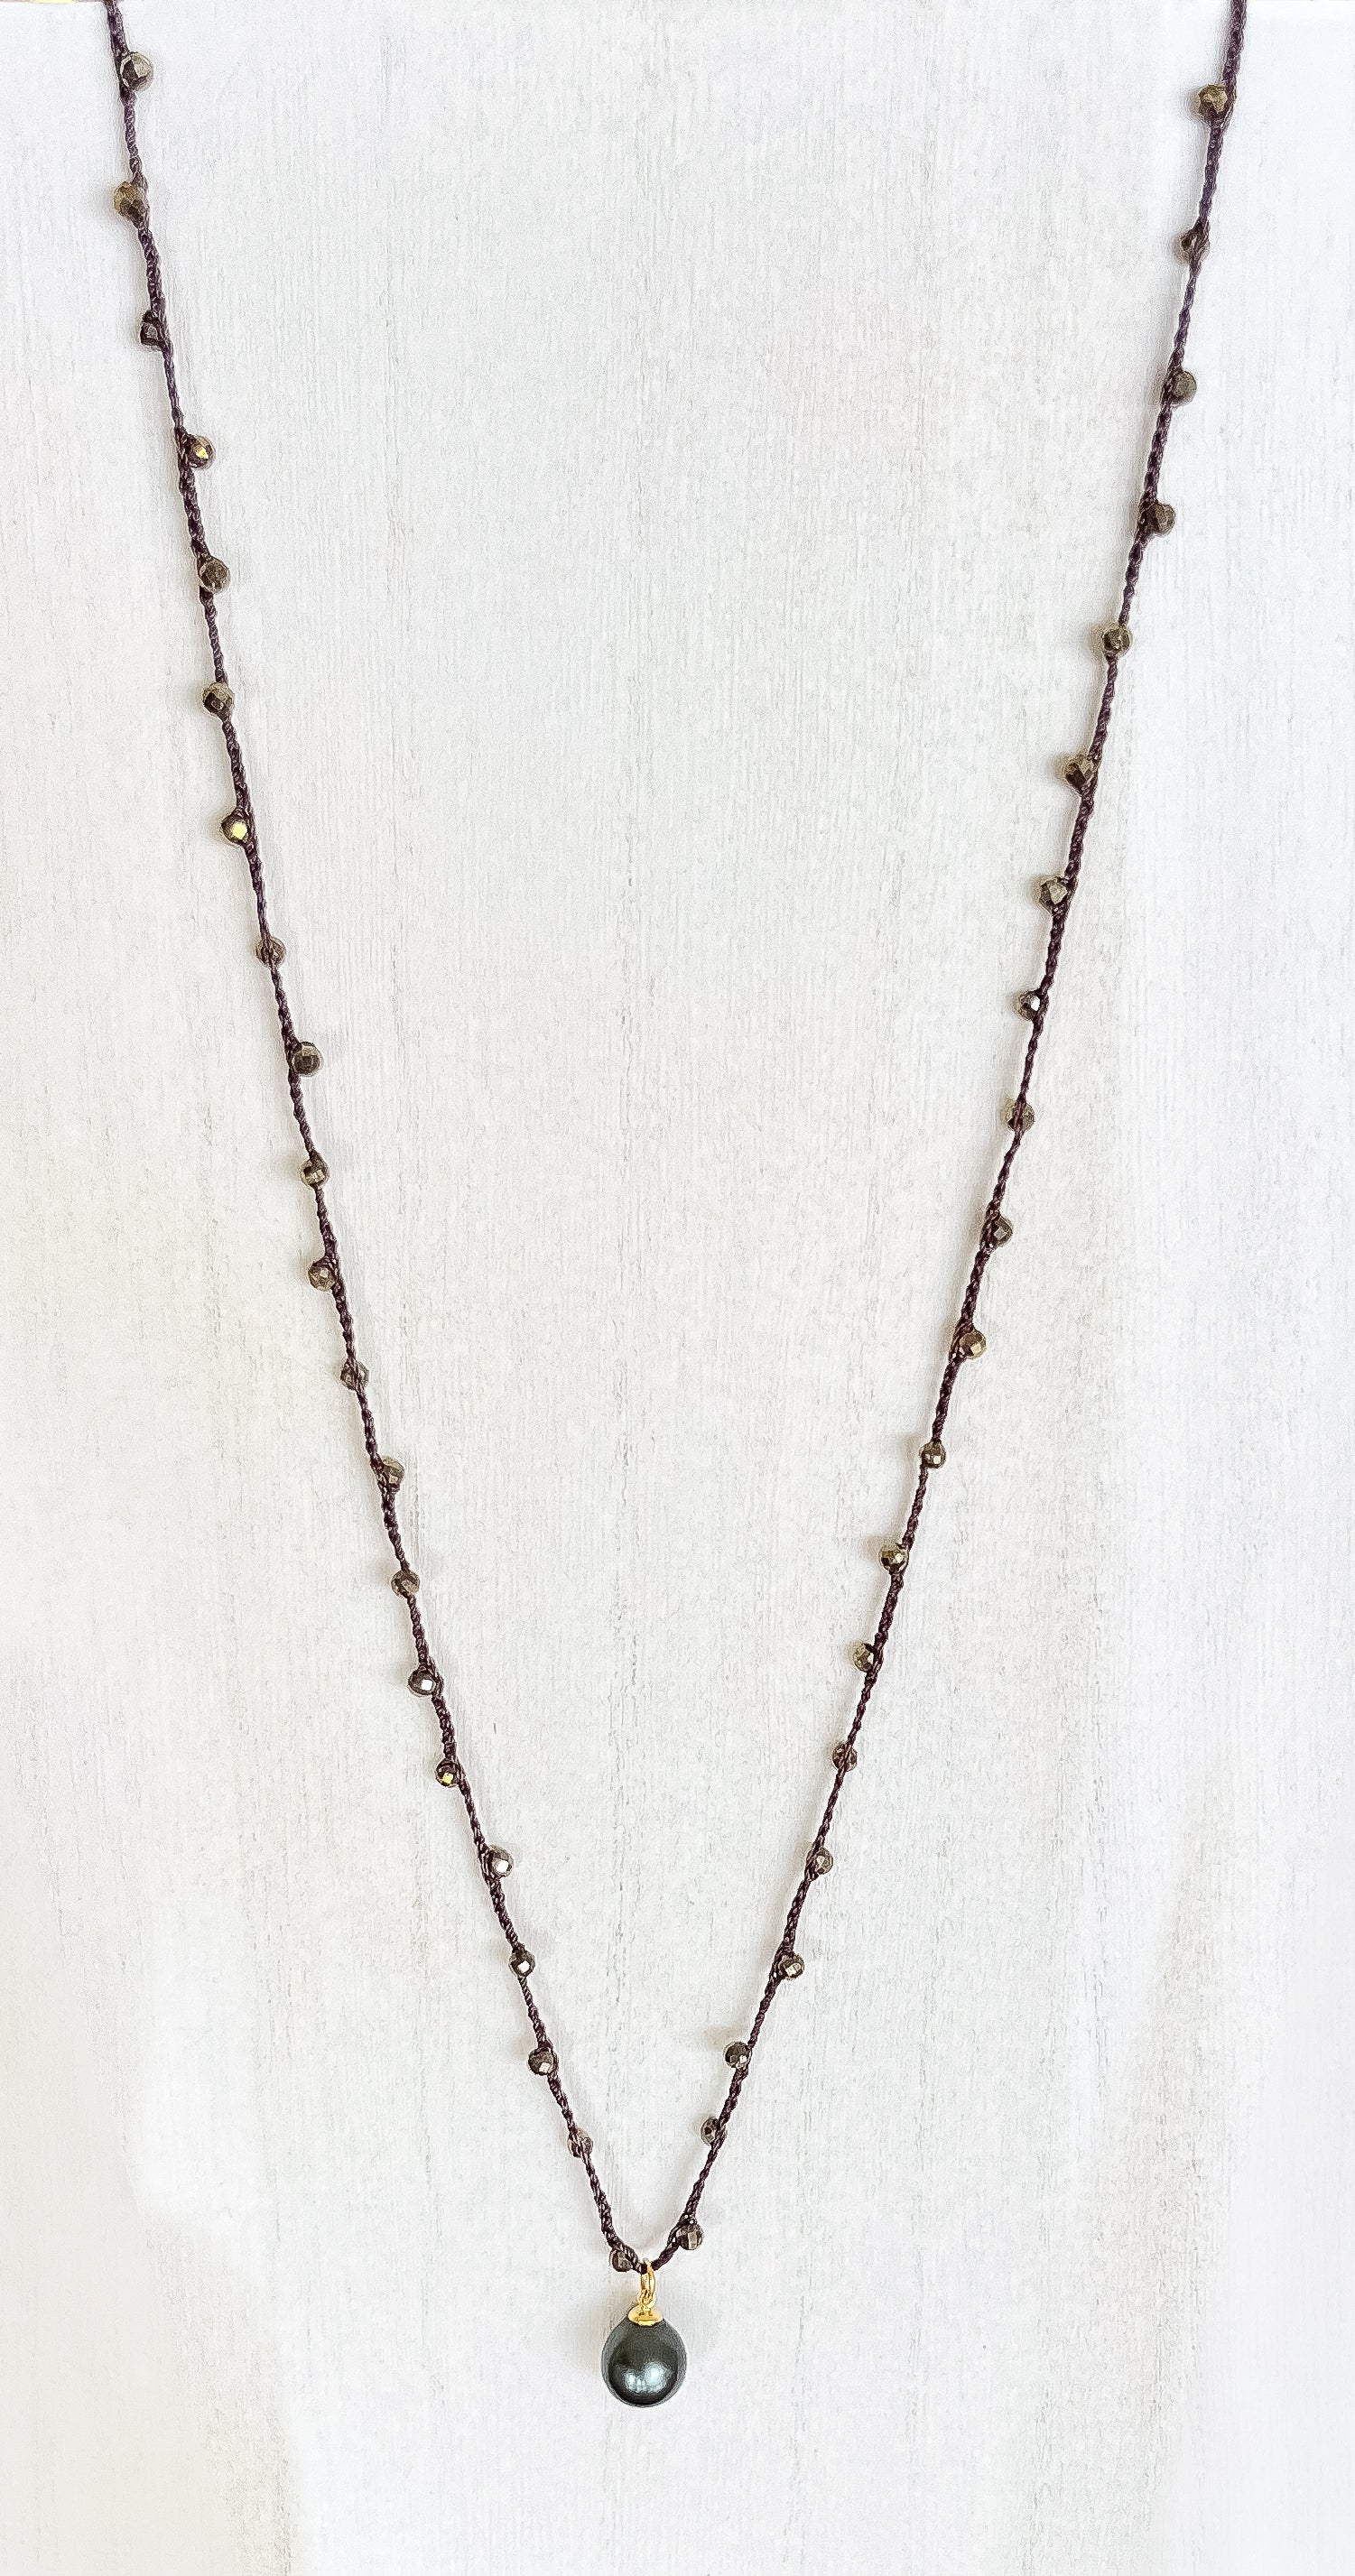 Tahitian Pearl + Pyrite Crochet Necklace